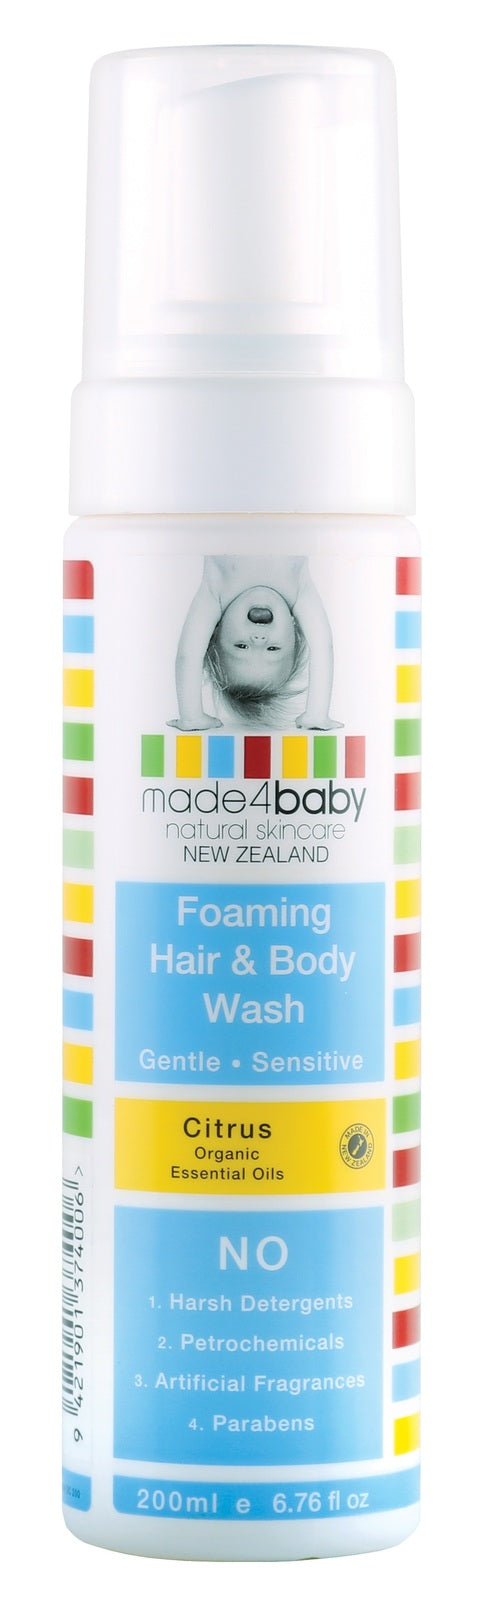 Made4Baby: Foaming Hair and Body Wash - Organic Citrus (200ml)